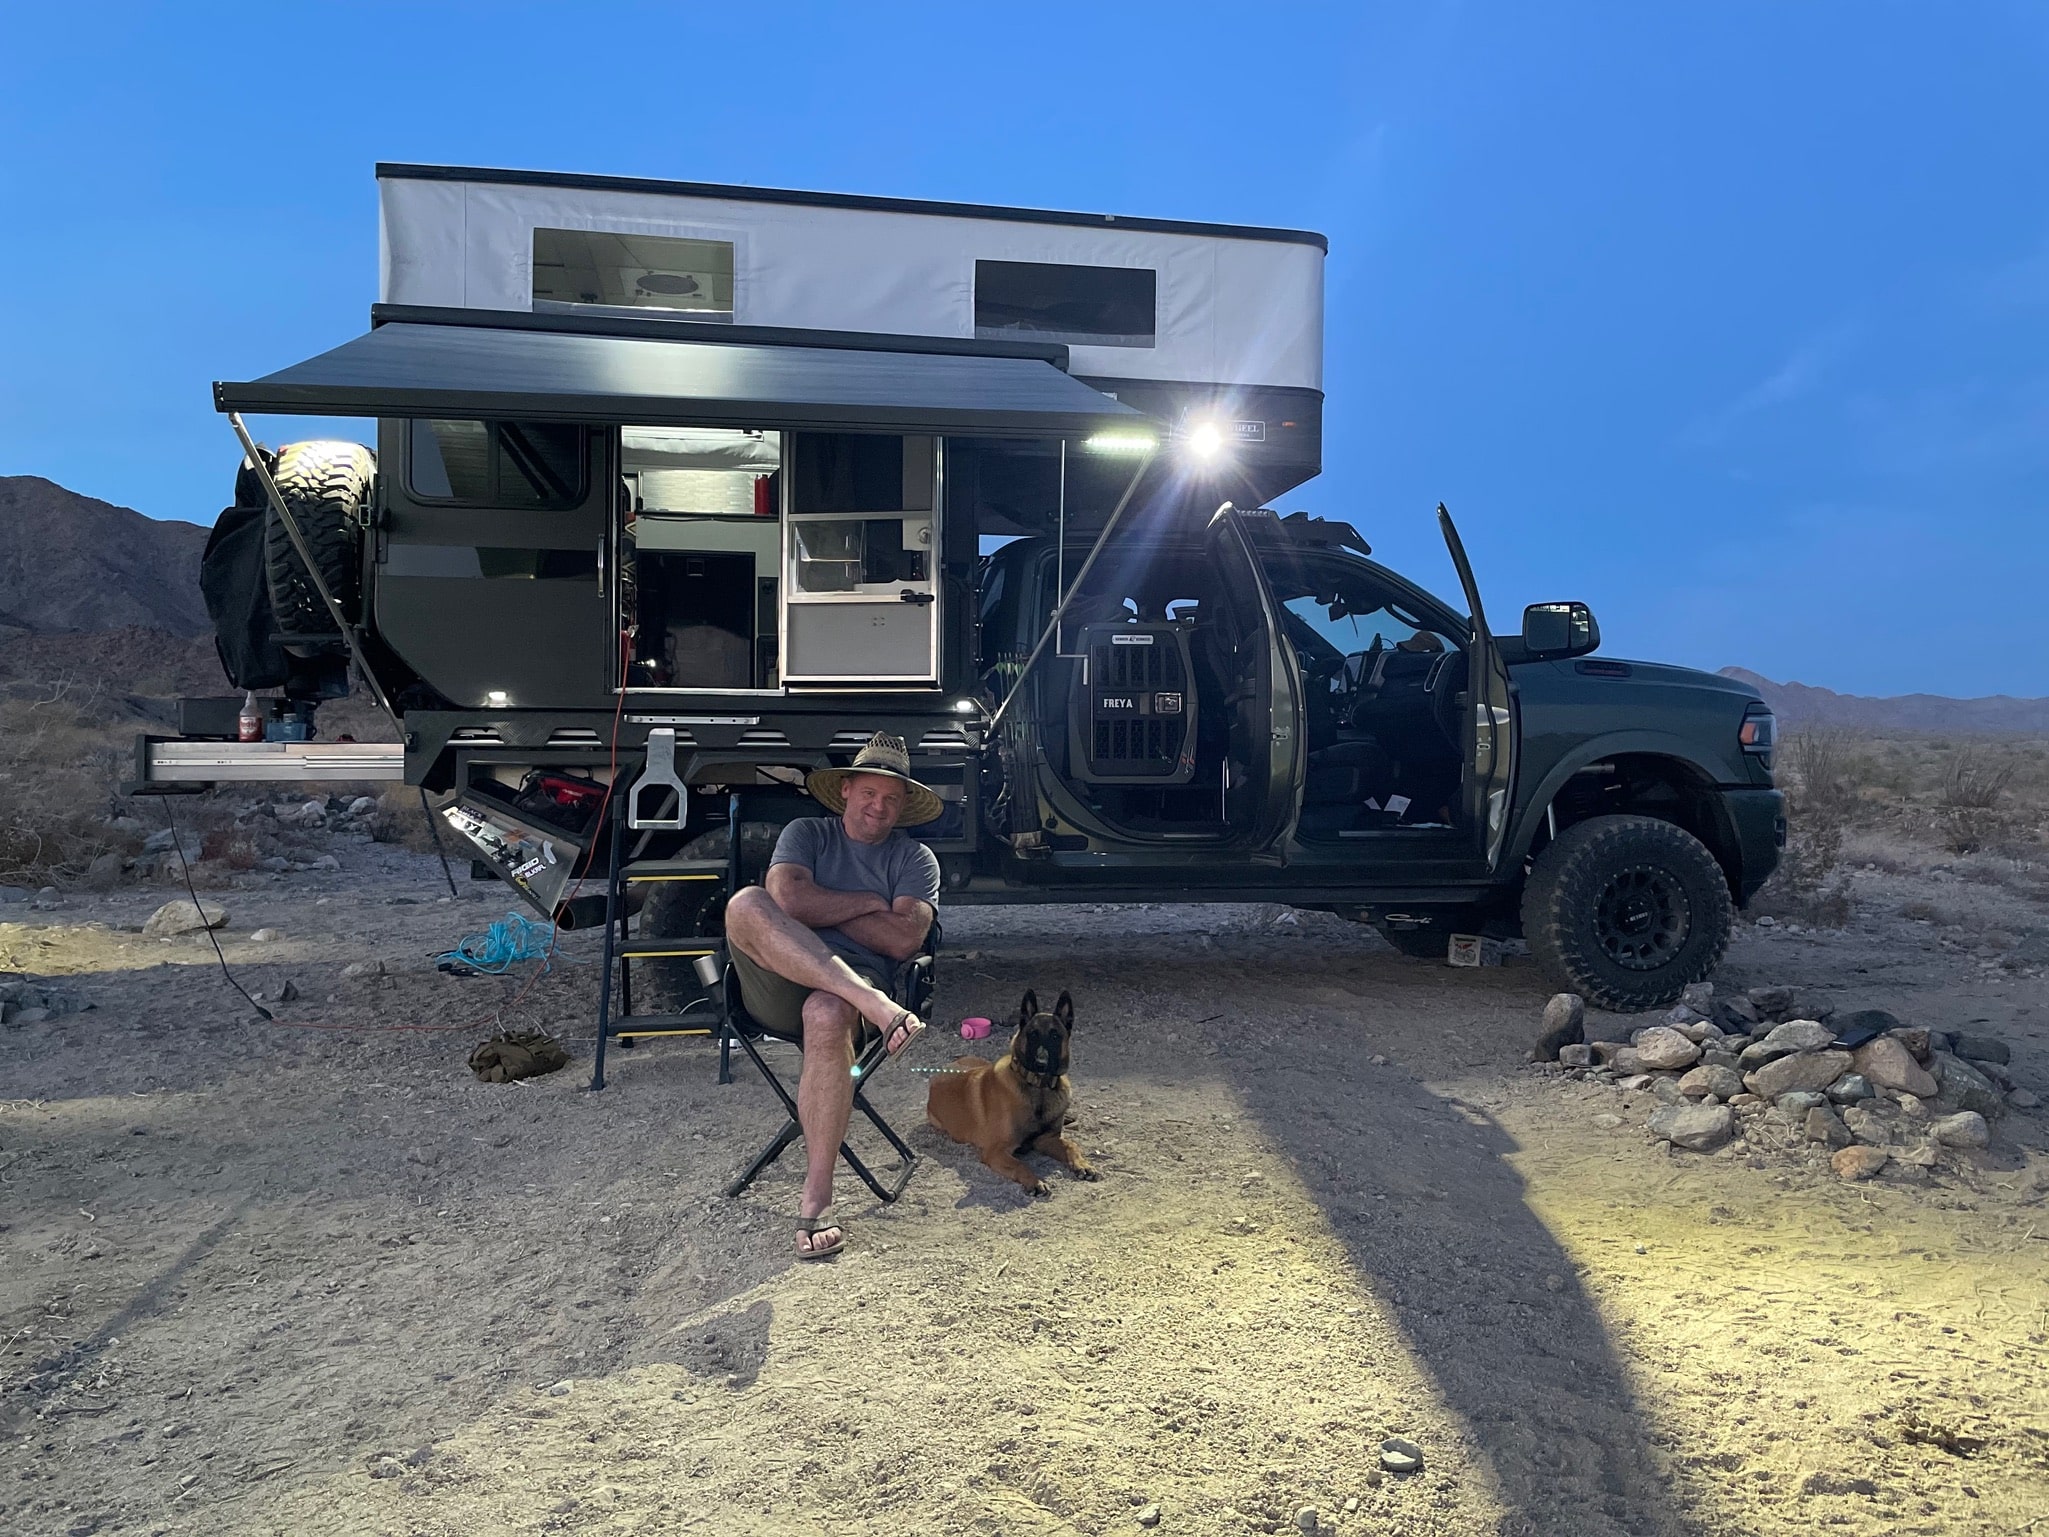 Sean Silvera sitting in a camping chair next to his German Shepard, Freya, in front of his overlanding rig